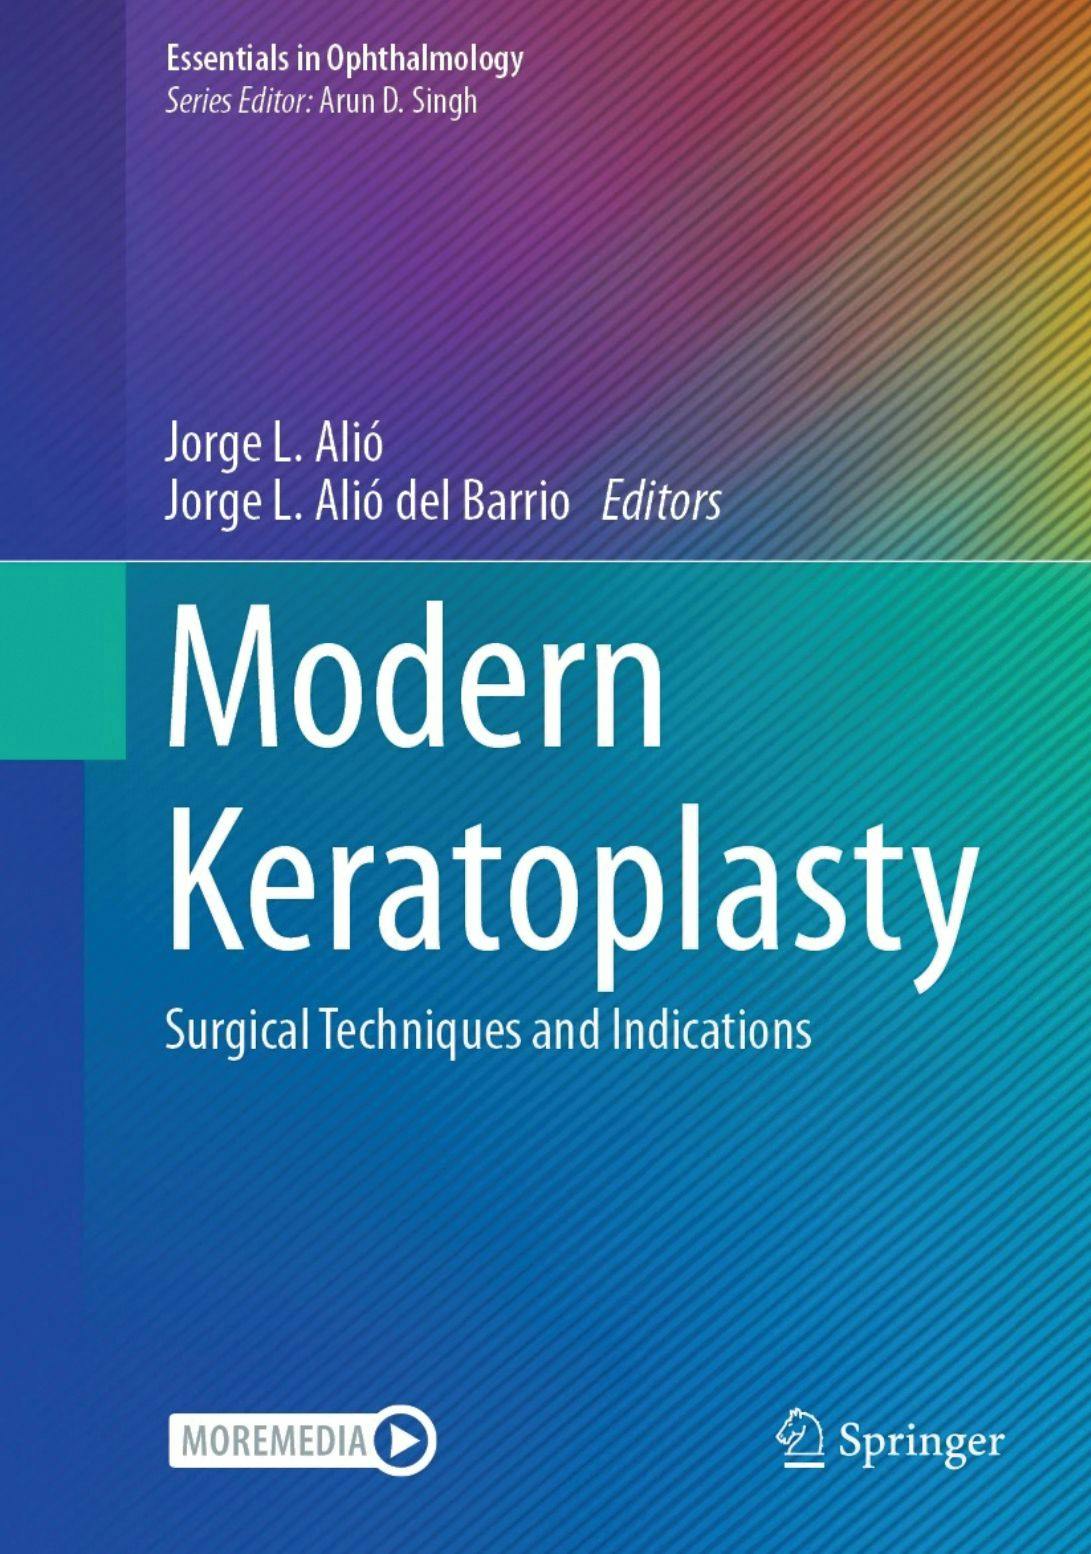 The cover of "Modern Keratoplasty: Surgical Techniques and Indications." Image used with permission from Springer Nature.